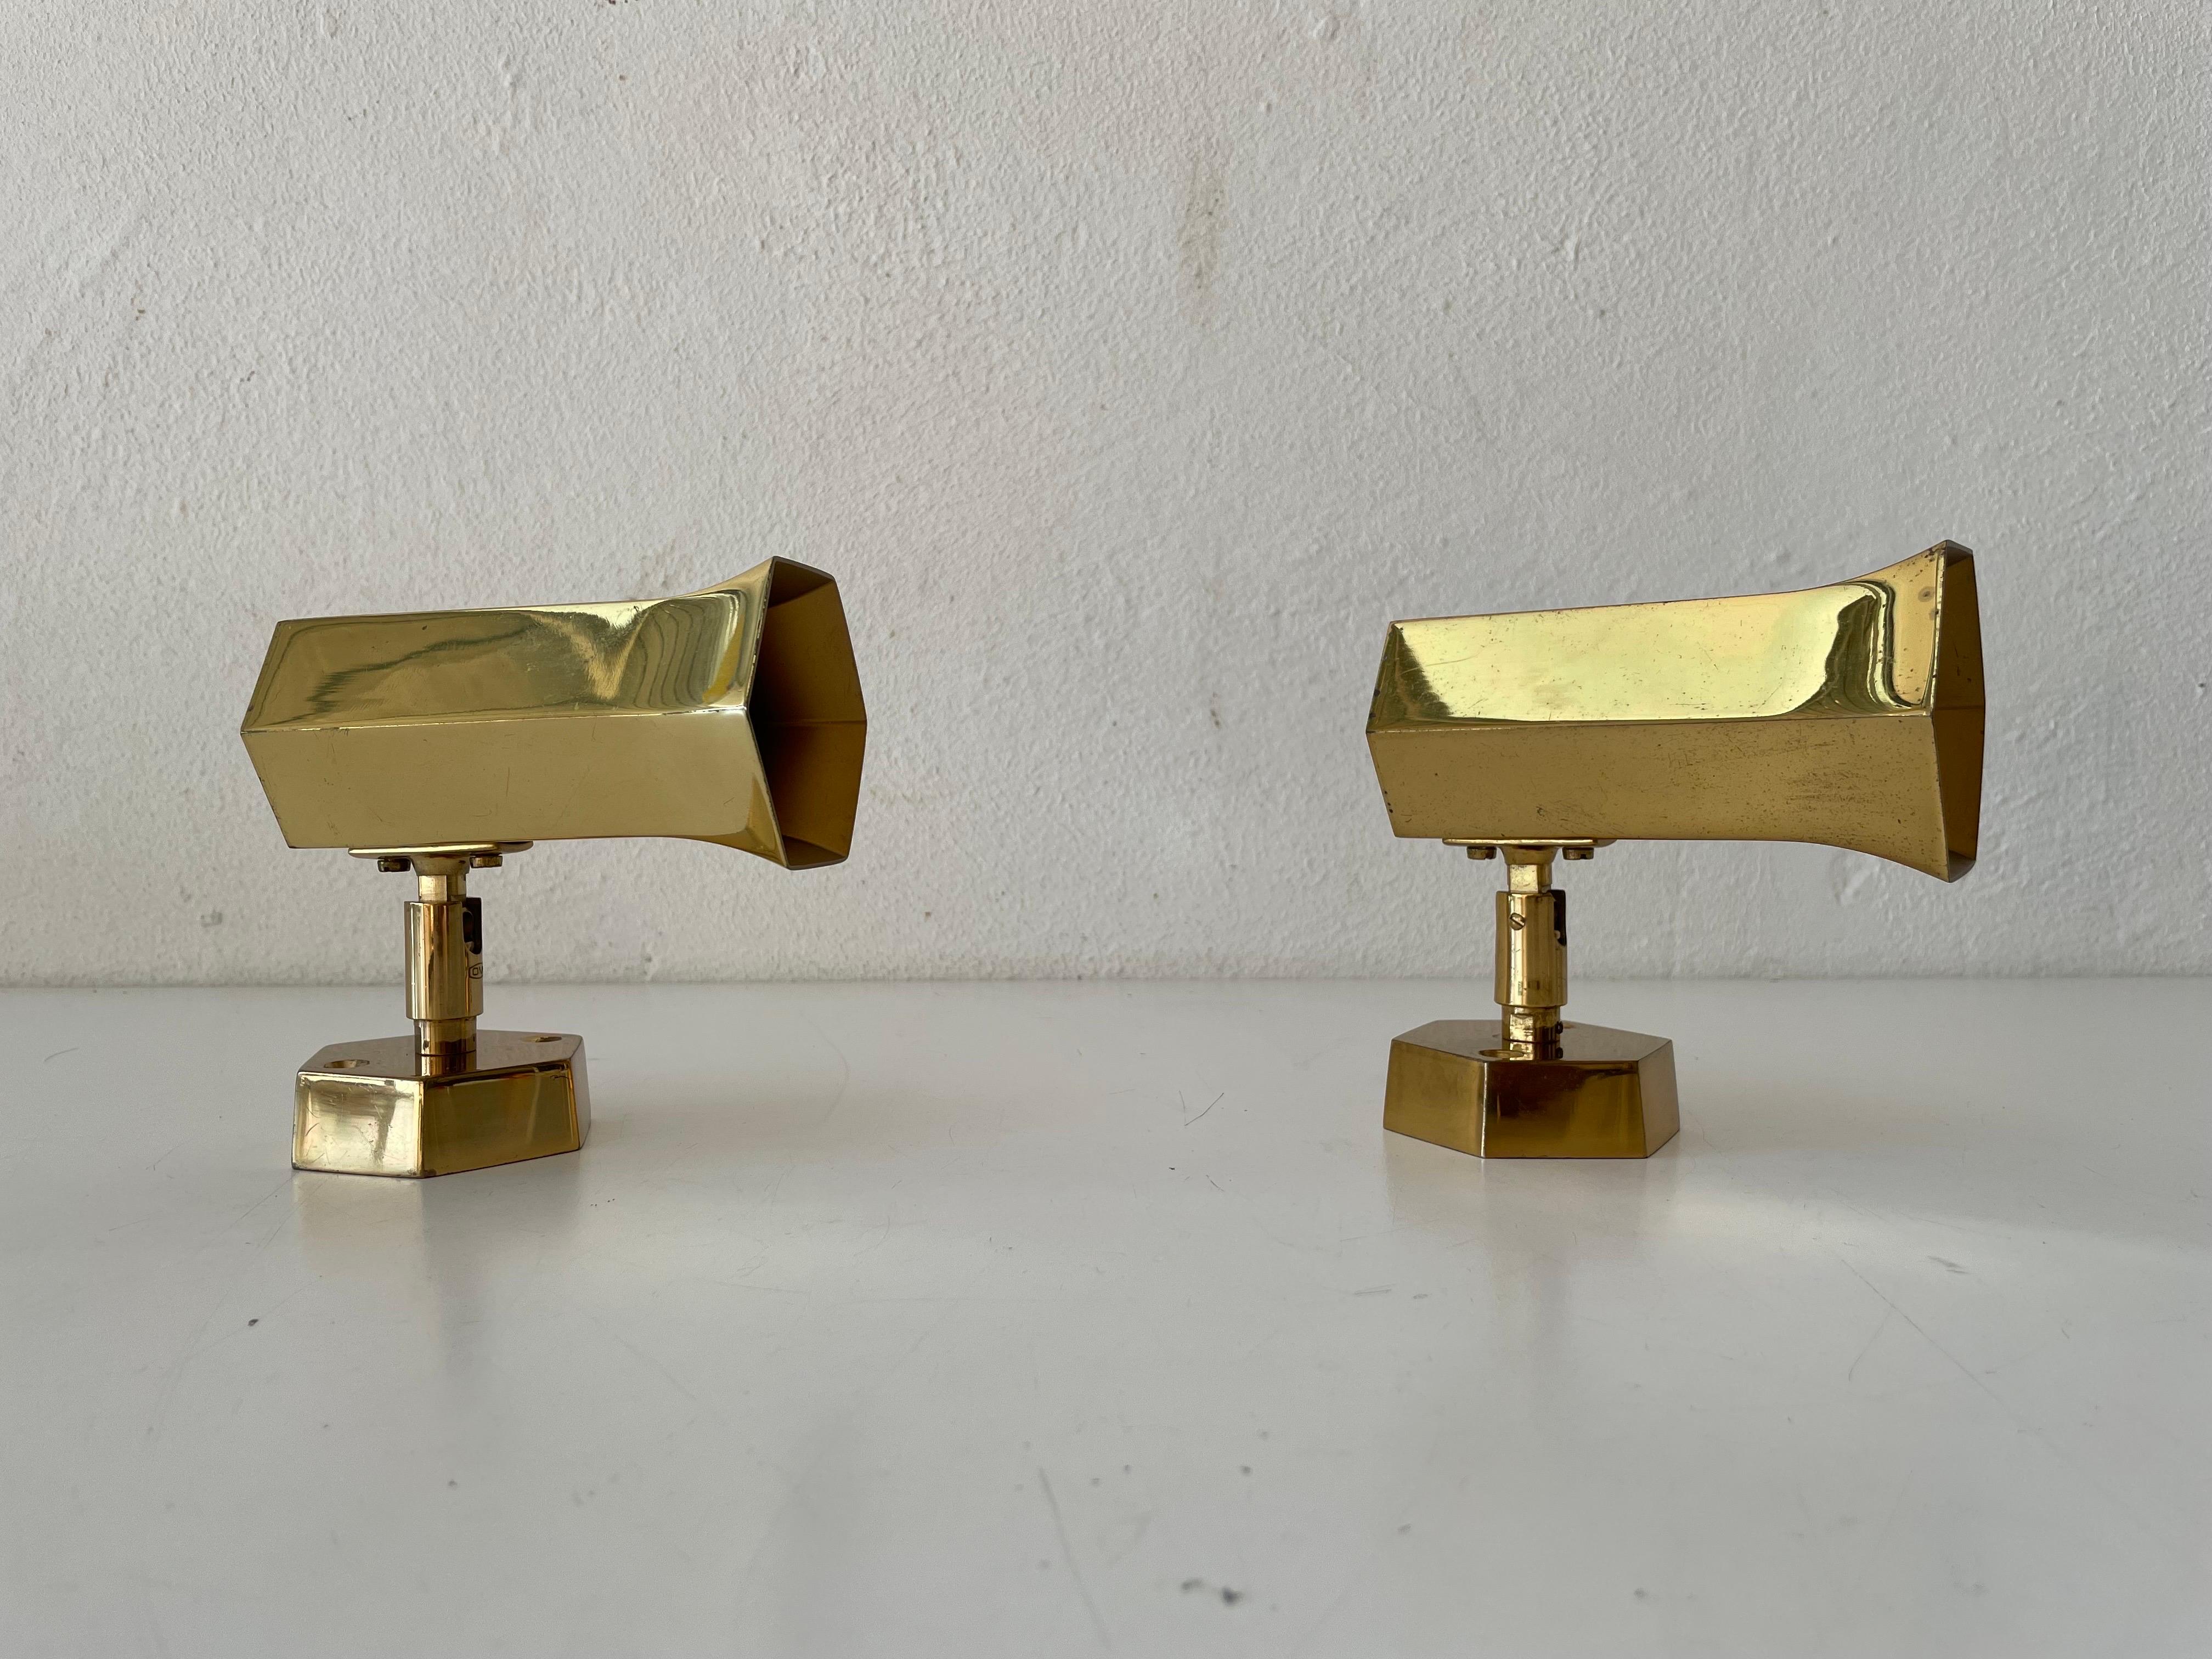 Beautiful Geometric Brass Pair of Sconces by Schröder, 1960s, Germany

Very nice high quality wall lamps

Lamps are in very good vintage condition.

These lamps works with E14 standard light bulbs. 
Wired and suitable to use in all countries.